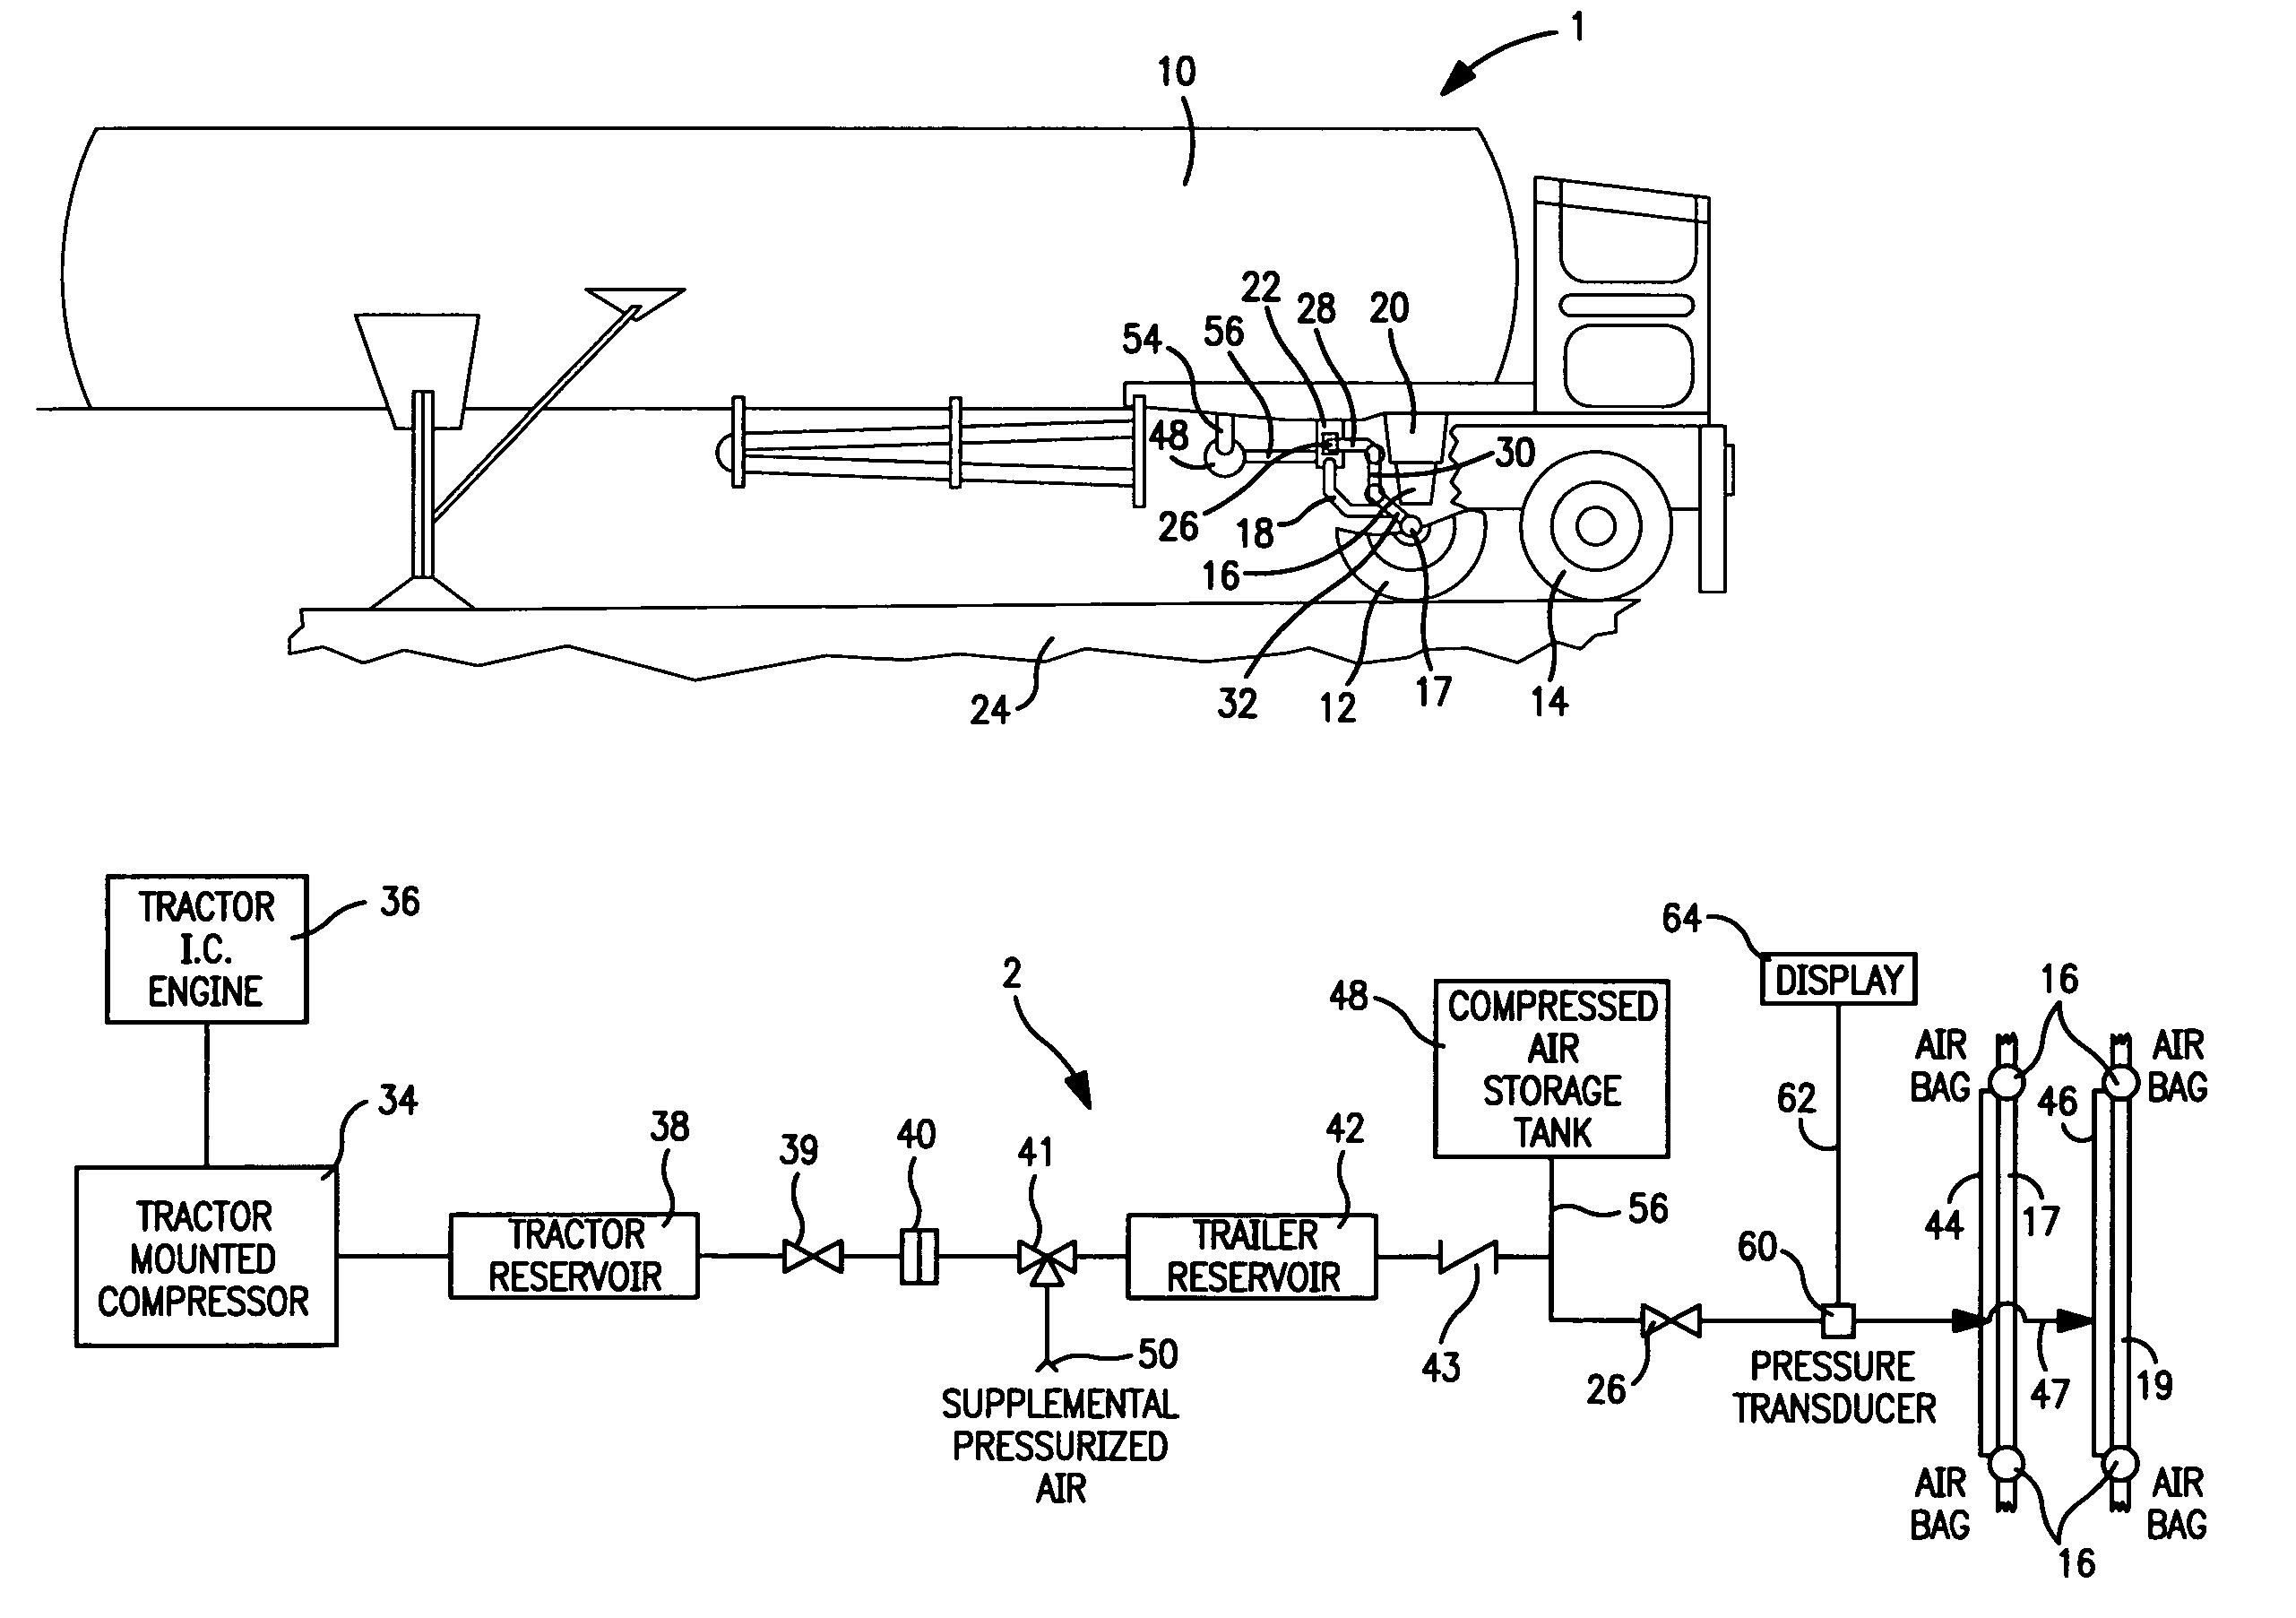 Method of measuring the weight of bulk liquid material within a trailer